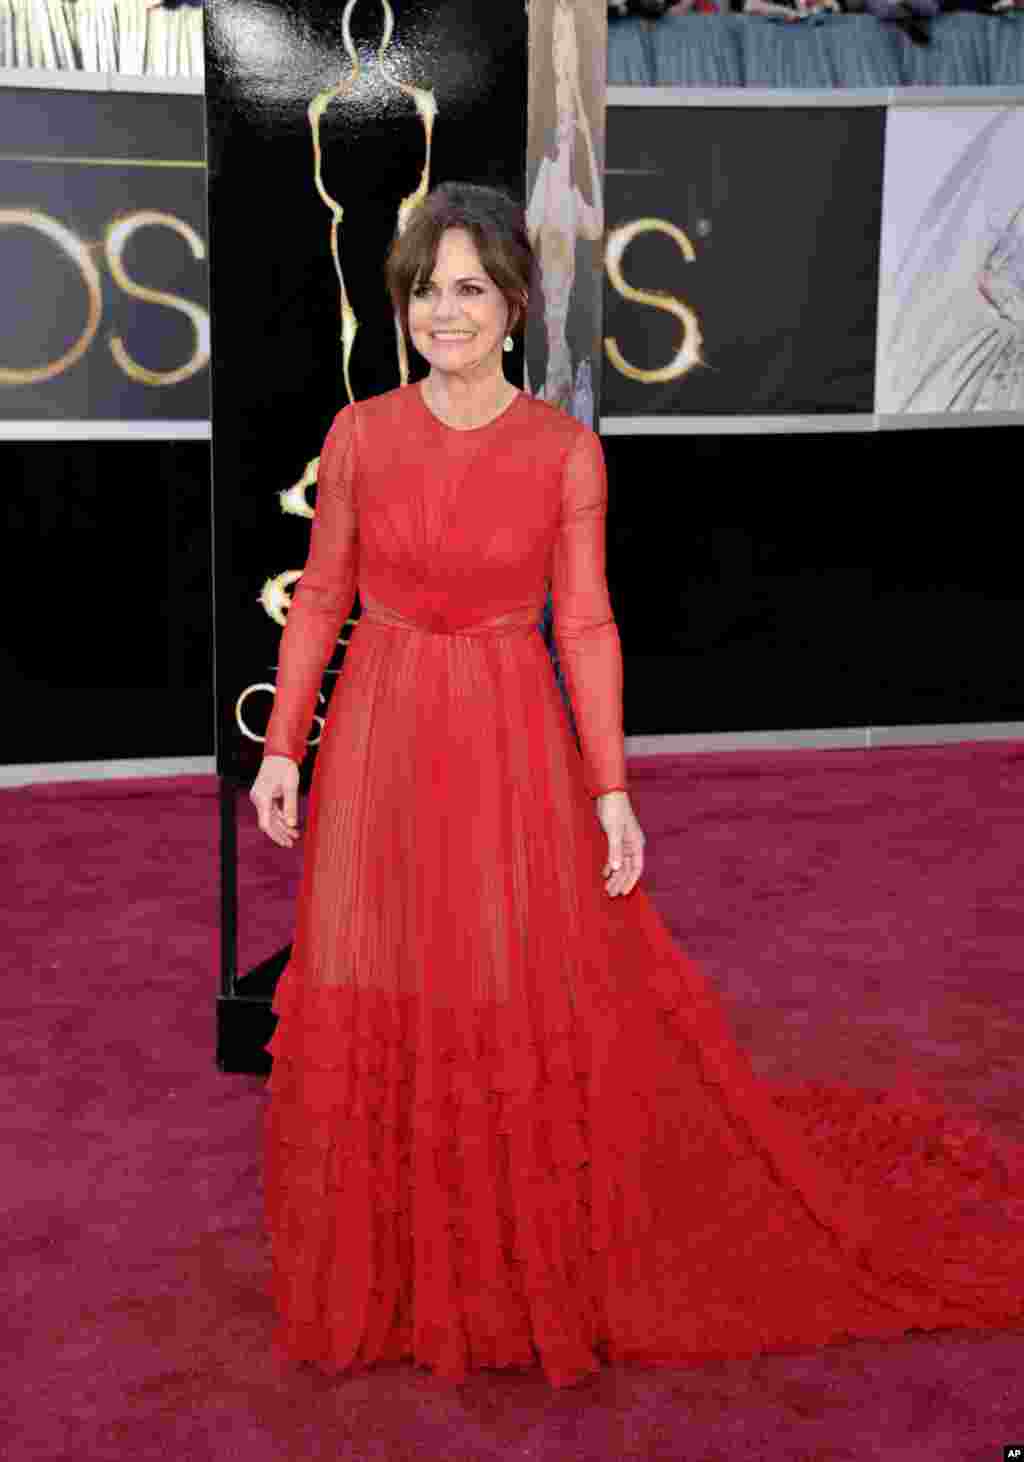 Actress Sally Field arrives at the 85th Academy Awards at the Dolby Theatre, Feb. 24, 2013, in Los Angeles.